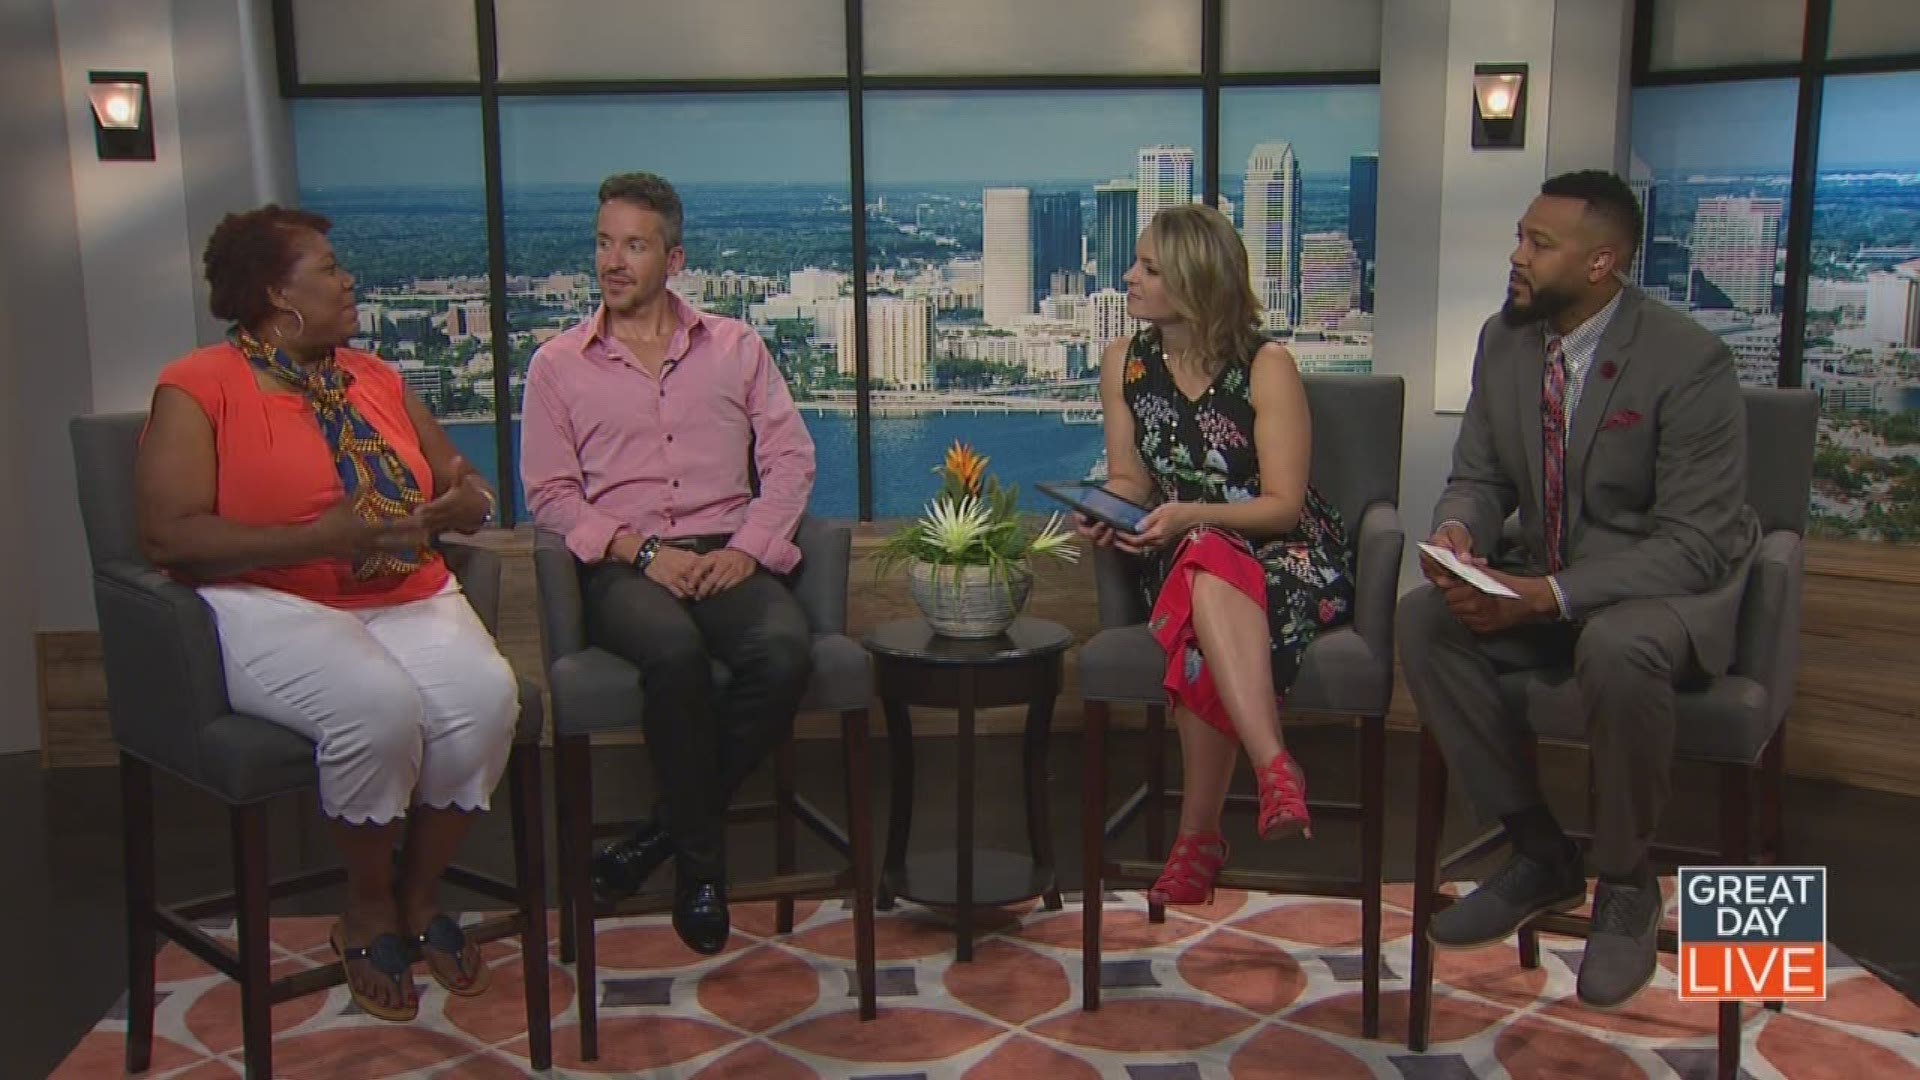 Michael Clark and Angoletta Taylor join us in studio with Dating advice and tips.